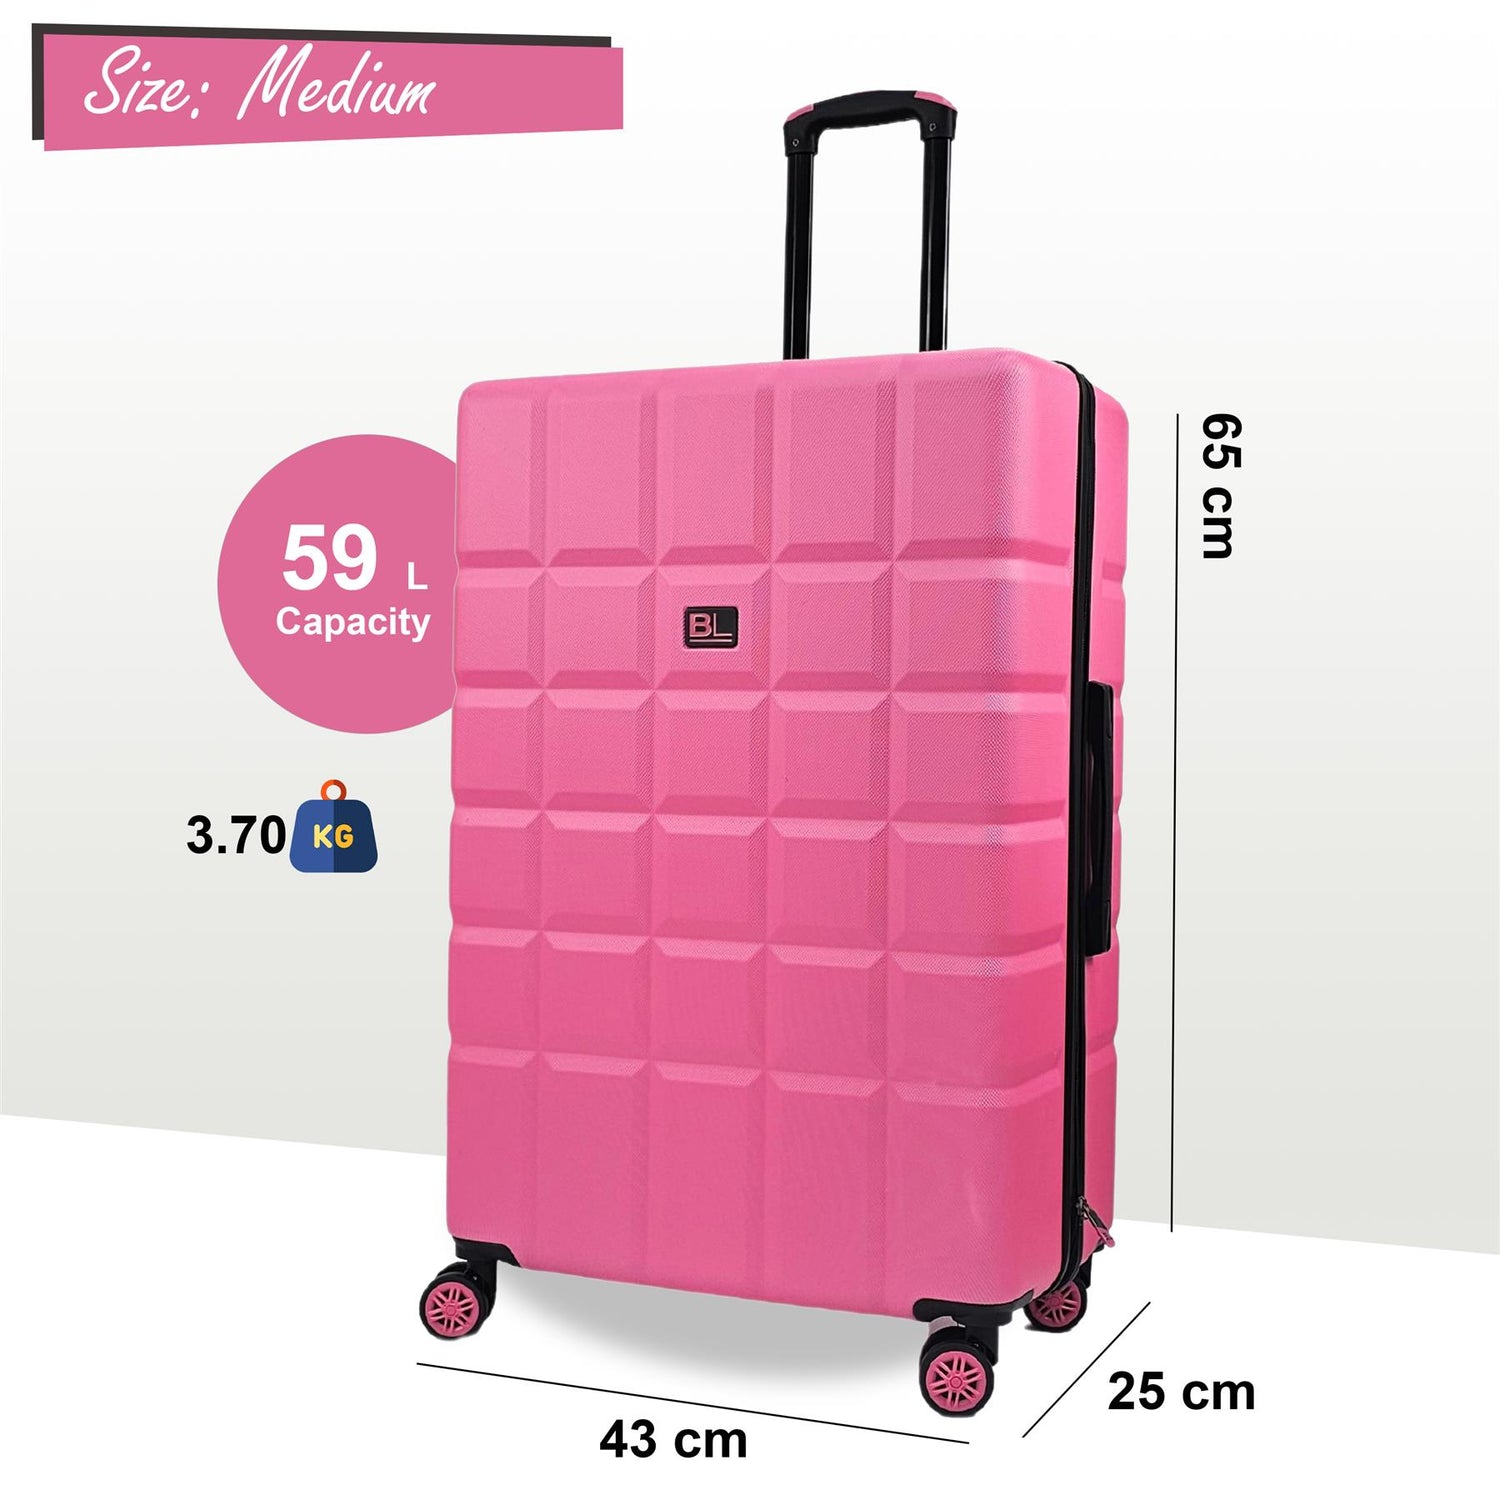 Coker Medium Soft Shell Suitcase in Pink